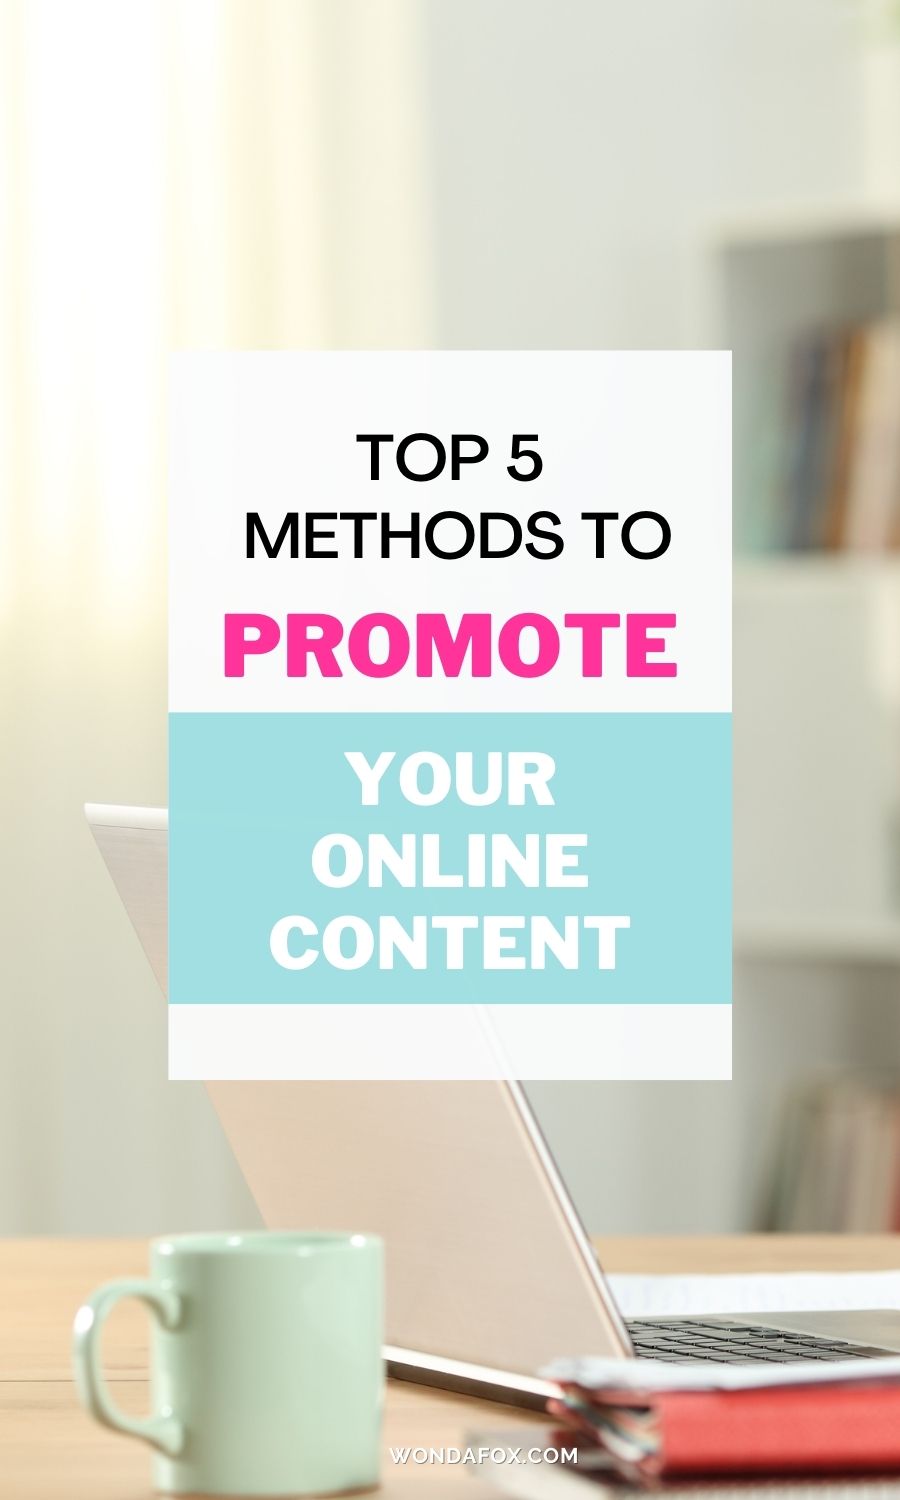 Top 5 methods to promote your online content